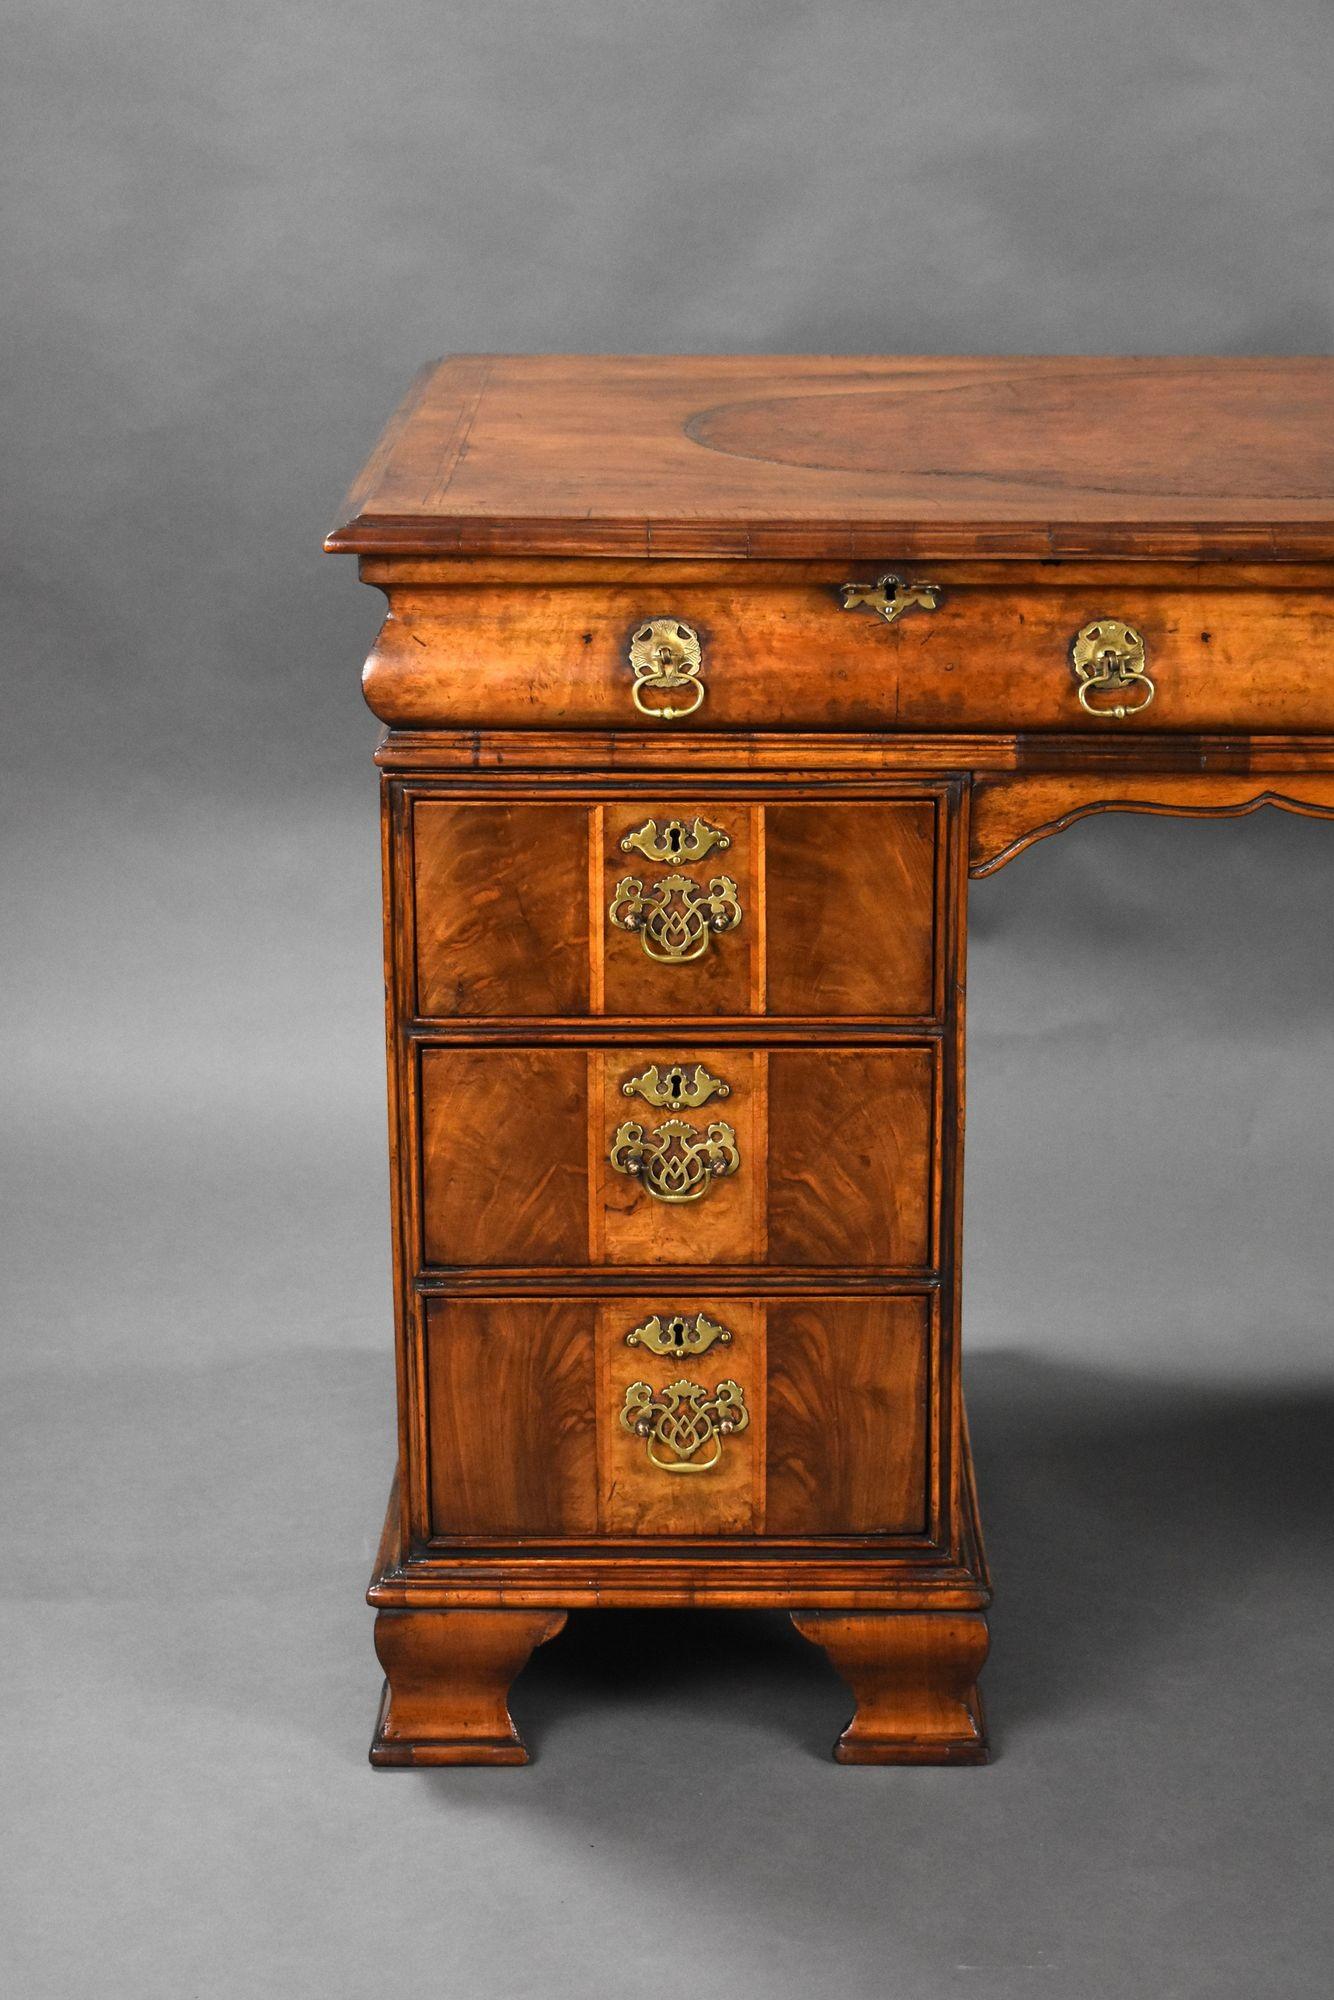 For sale is a good quality antique figured walnut desk, having a shaped, hand coloured leather hide writing surface, above two long drawers in the top, with a further three short drawers in each pedestal, all with original brass handles. The desk